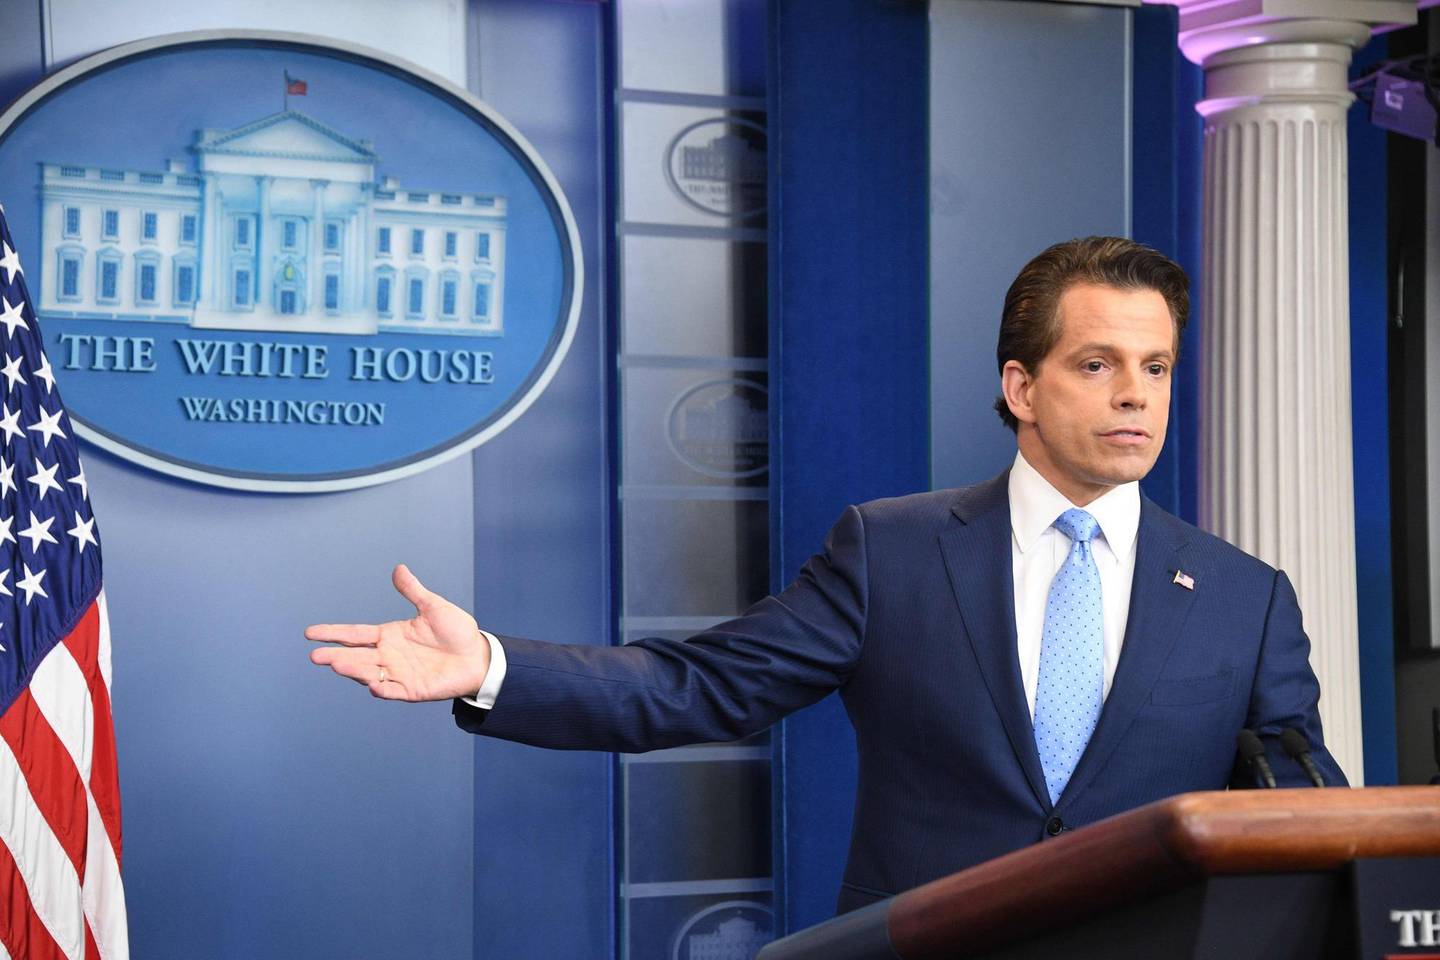 (FILES) This file photo taken on July 21, 2017 shows Anthony Scaramucci, former White House communications director during a press briefing at the White House in Washington, DC.  
After months of being blocked by political rivals, Anthony Scaramuccci had finally landed his coveted White House job.Just 10 days later, the fast-talking Wall Street financier was unceremoniously fired, his wife had filed for divorce and he'd missed the birth of their child. And if that wasn't enough, Scaramucci no longer owned the company that made him a millionaire -- he'd been forced to sell it to take on the role of White House communications director.Scaramucci's abrupt dismissal on July 31, 2017 completed a saga that was strange even by the standards of a US presidency that is proving to be unorthodox in any number of ways.
 / AFP PHOTO / JIM WATSON